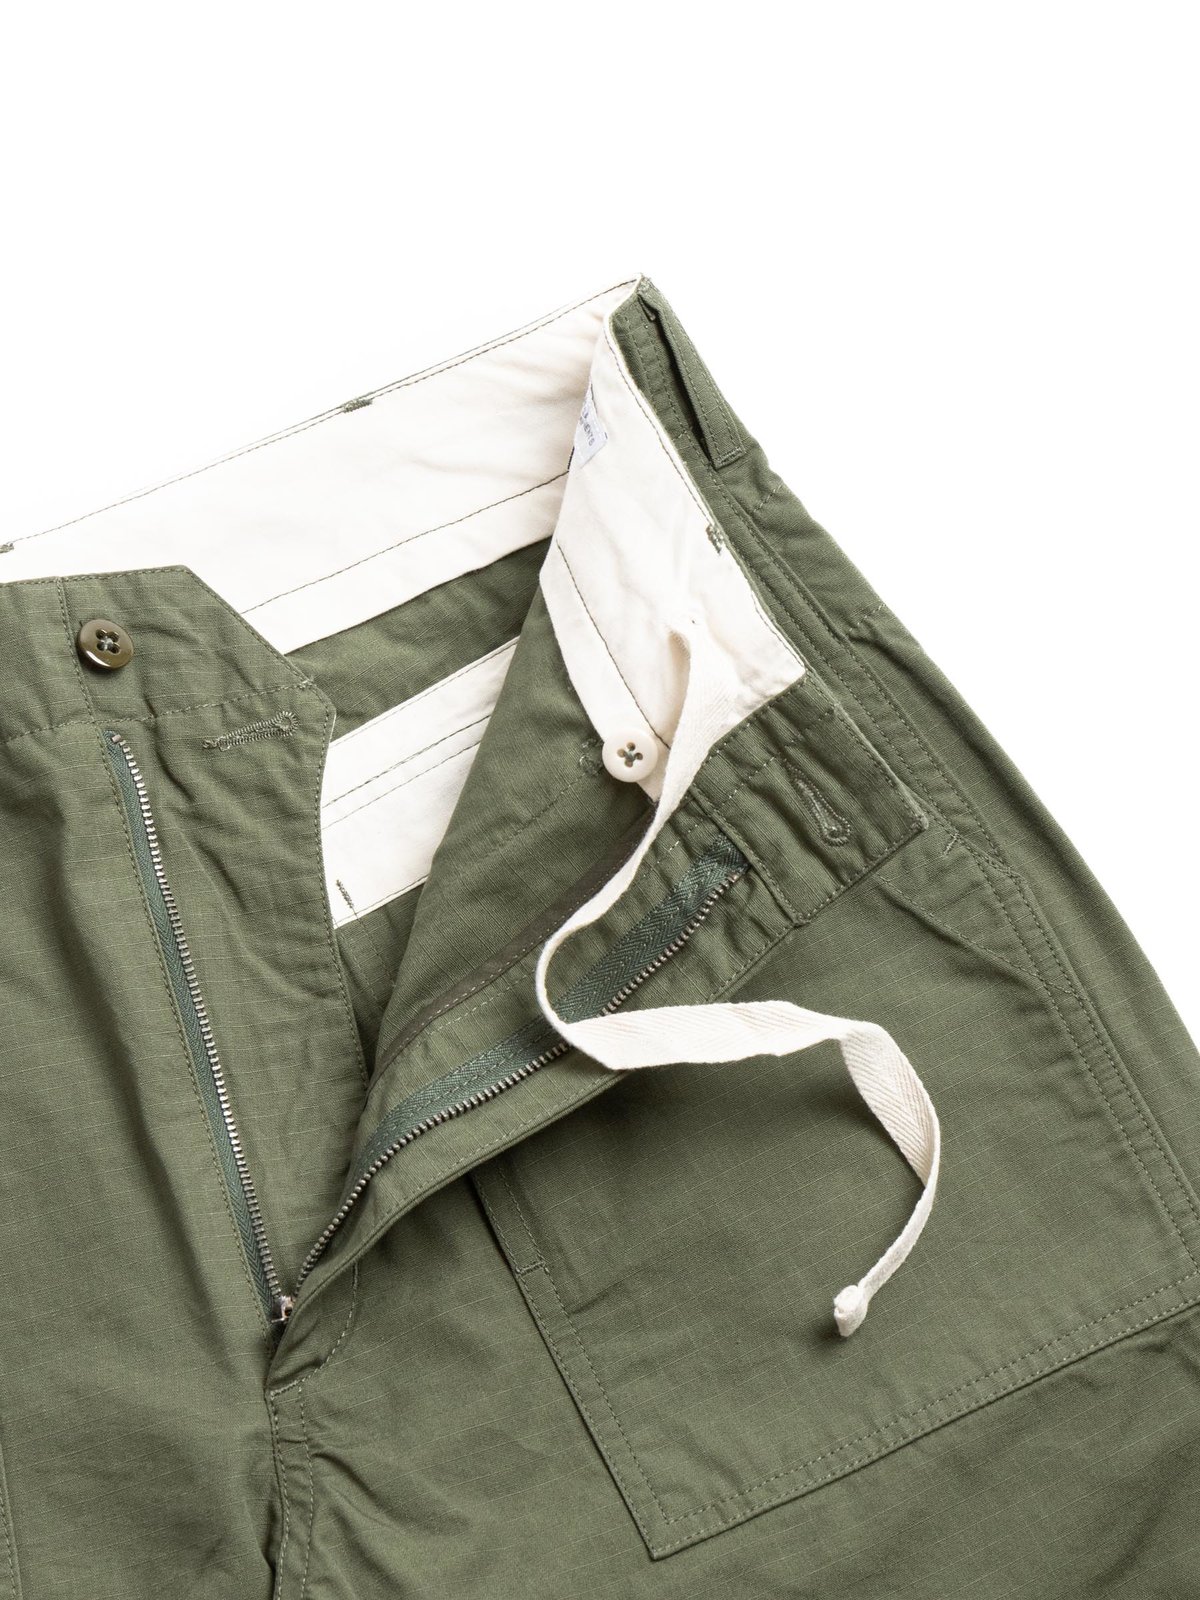 FATIGUE PANT OLIVE COTTON RIPSTOP - Image 4